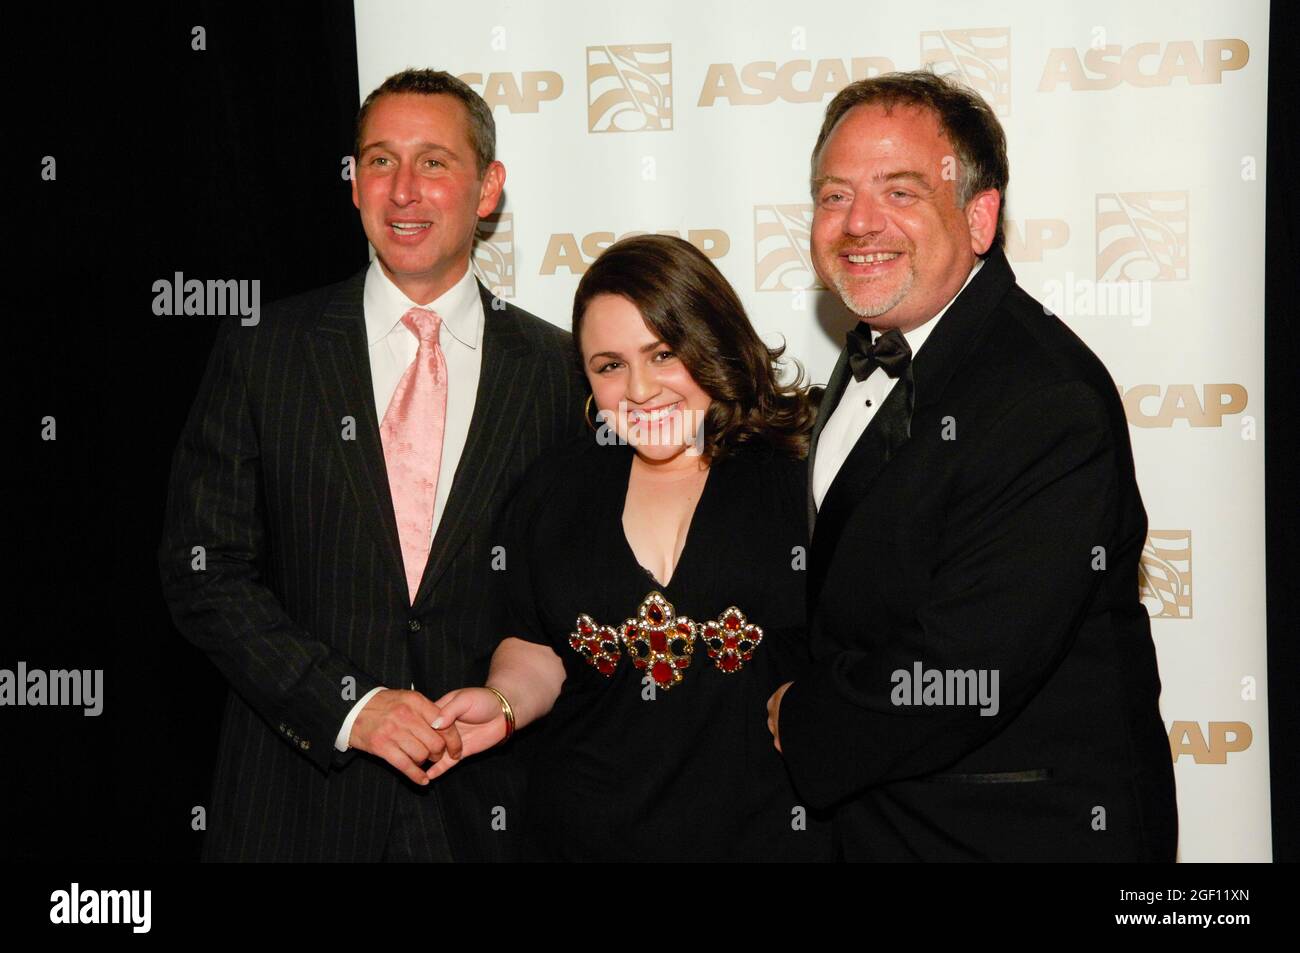 (L-R) Adam Shankman, actress Nikki Blonsky and Marc Shaiman attends red carpet arrivals at 2007 ASCAP Film & Television Music Awards at Kodak Theatre on April 17, 2007 in Hollywood, California, Stock Photo